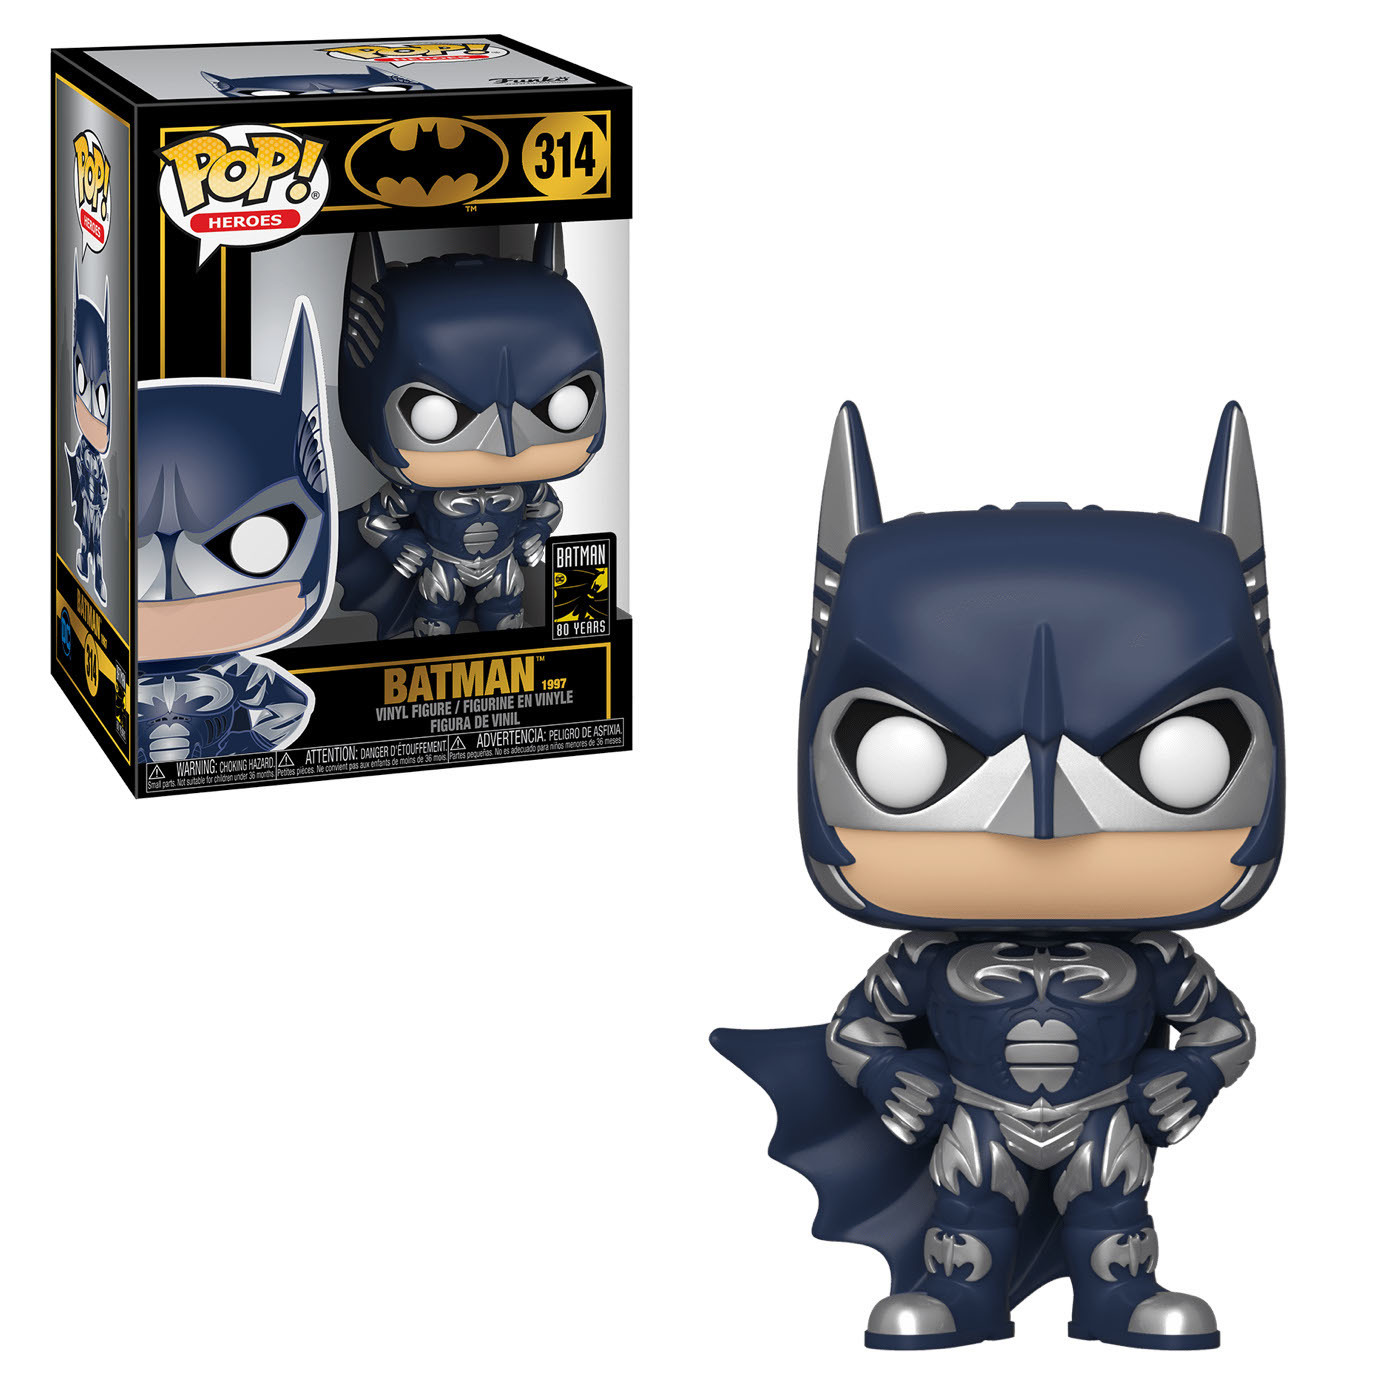 Batman 1997 80th Anniversary Pop! Vinyl Figure - Owls Collectibles - Trusted American Sports Cards & Toy Supplier Located In Delray Beach, Florida